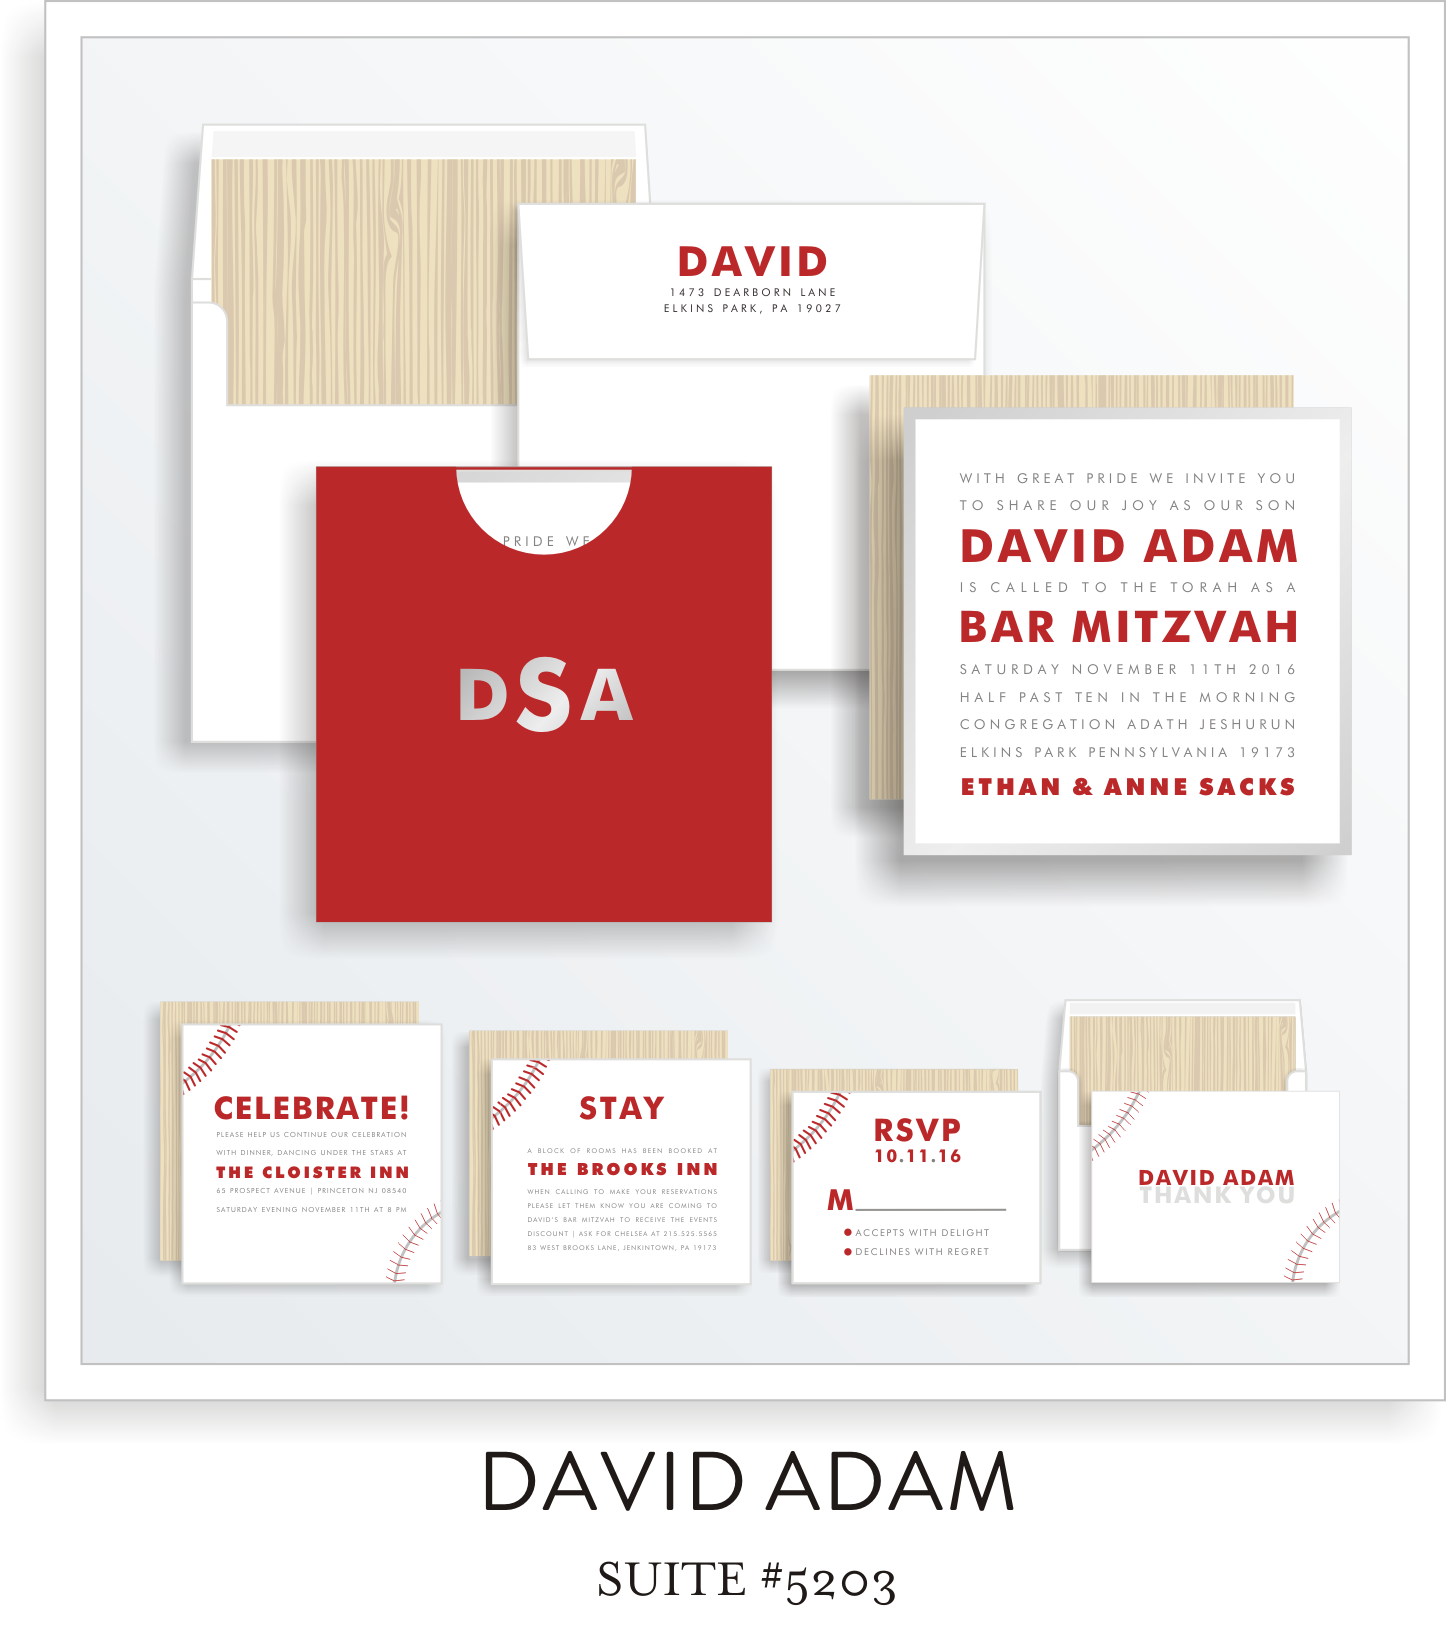 Copy of <a href=/bar-mitzvah-invitations-5203>Suite Details→</a><strong><a href=/david-adam-in-colors>see more colors→</a></strong>